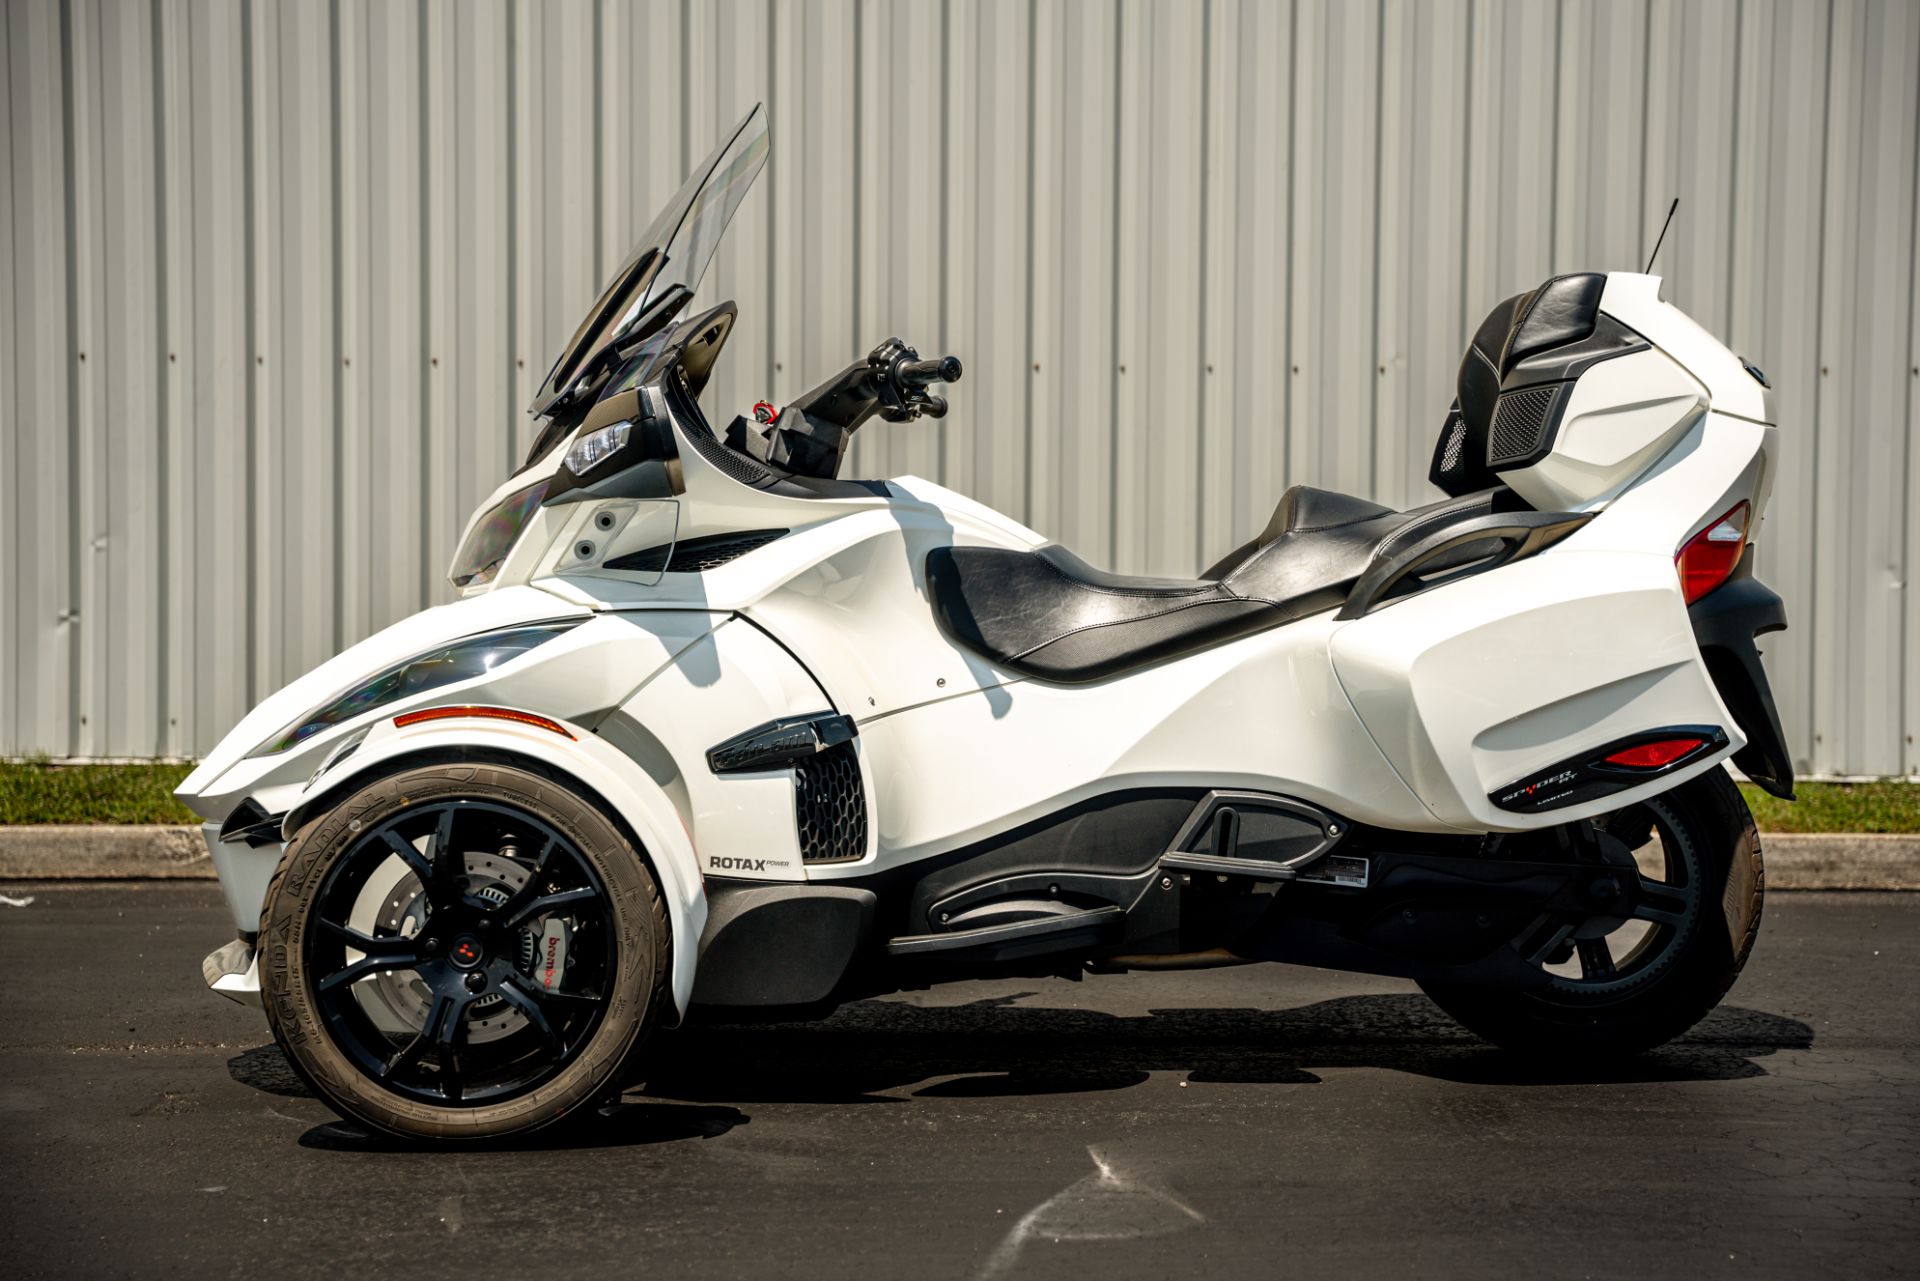 2019 Can-Am Spyder RT Limited in Jacksonville, Florida - Photo 3